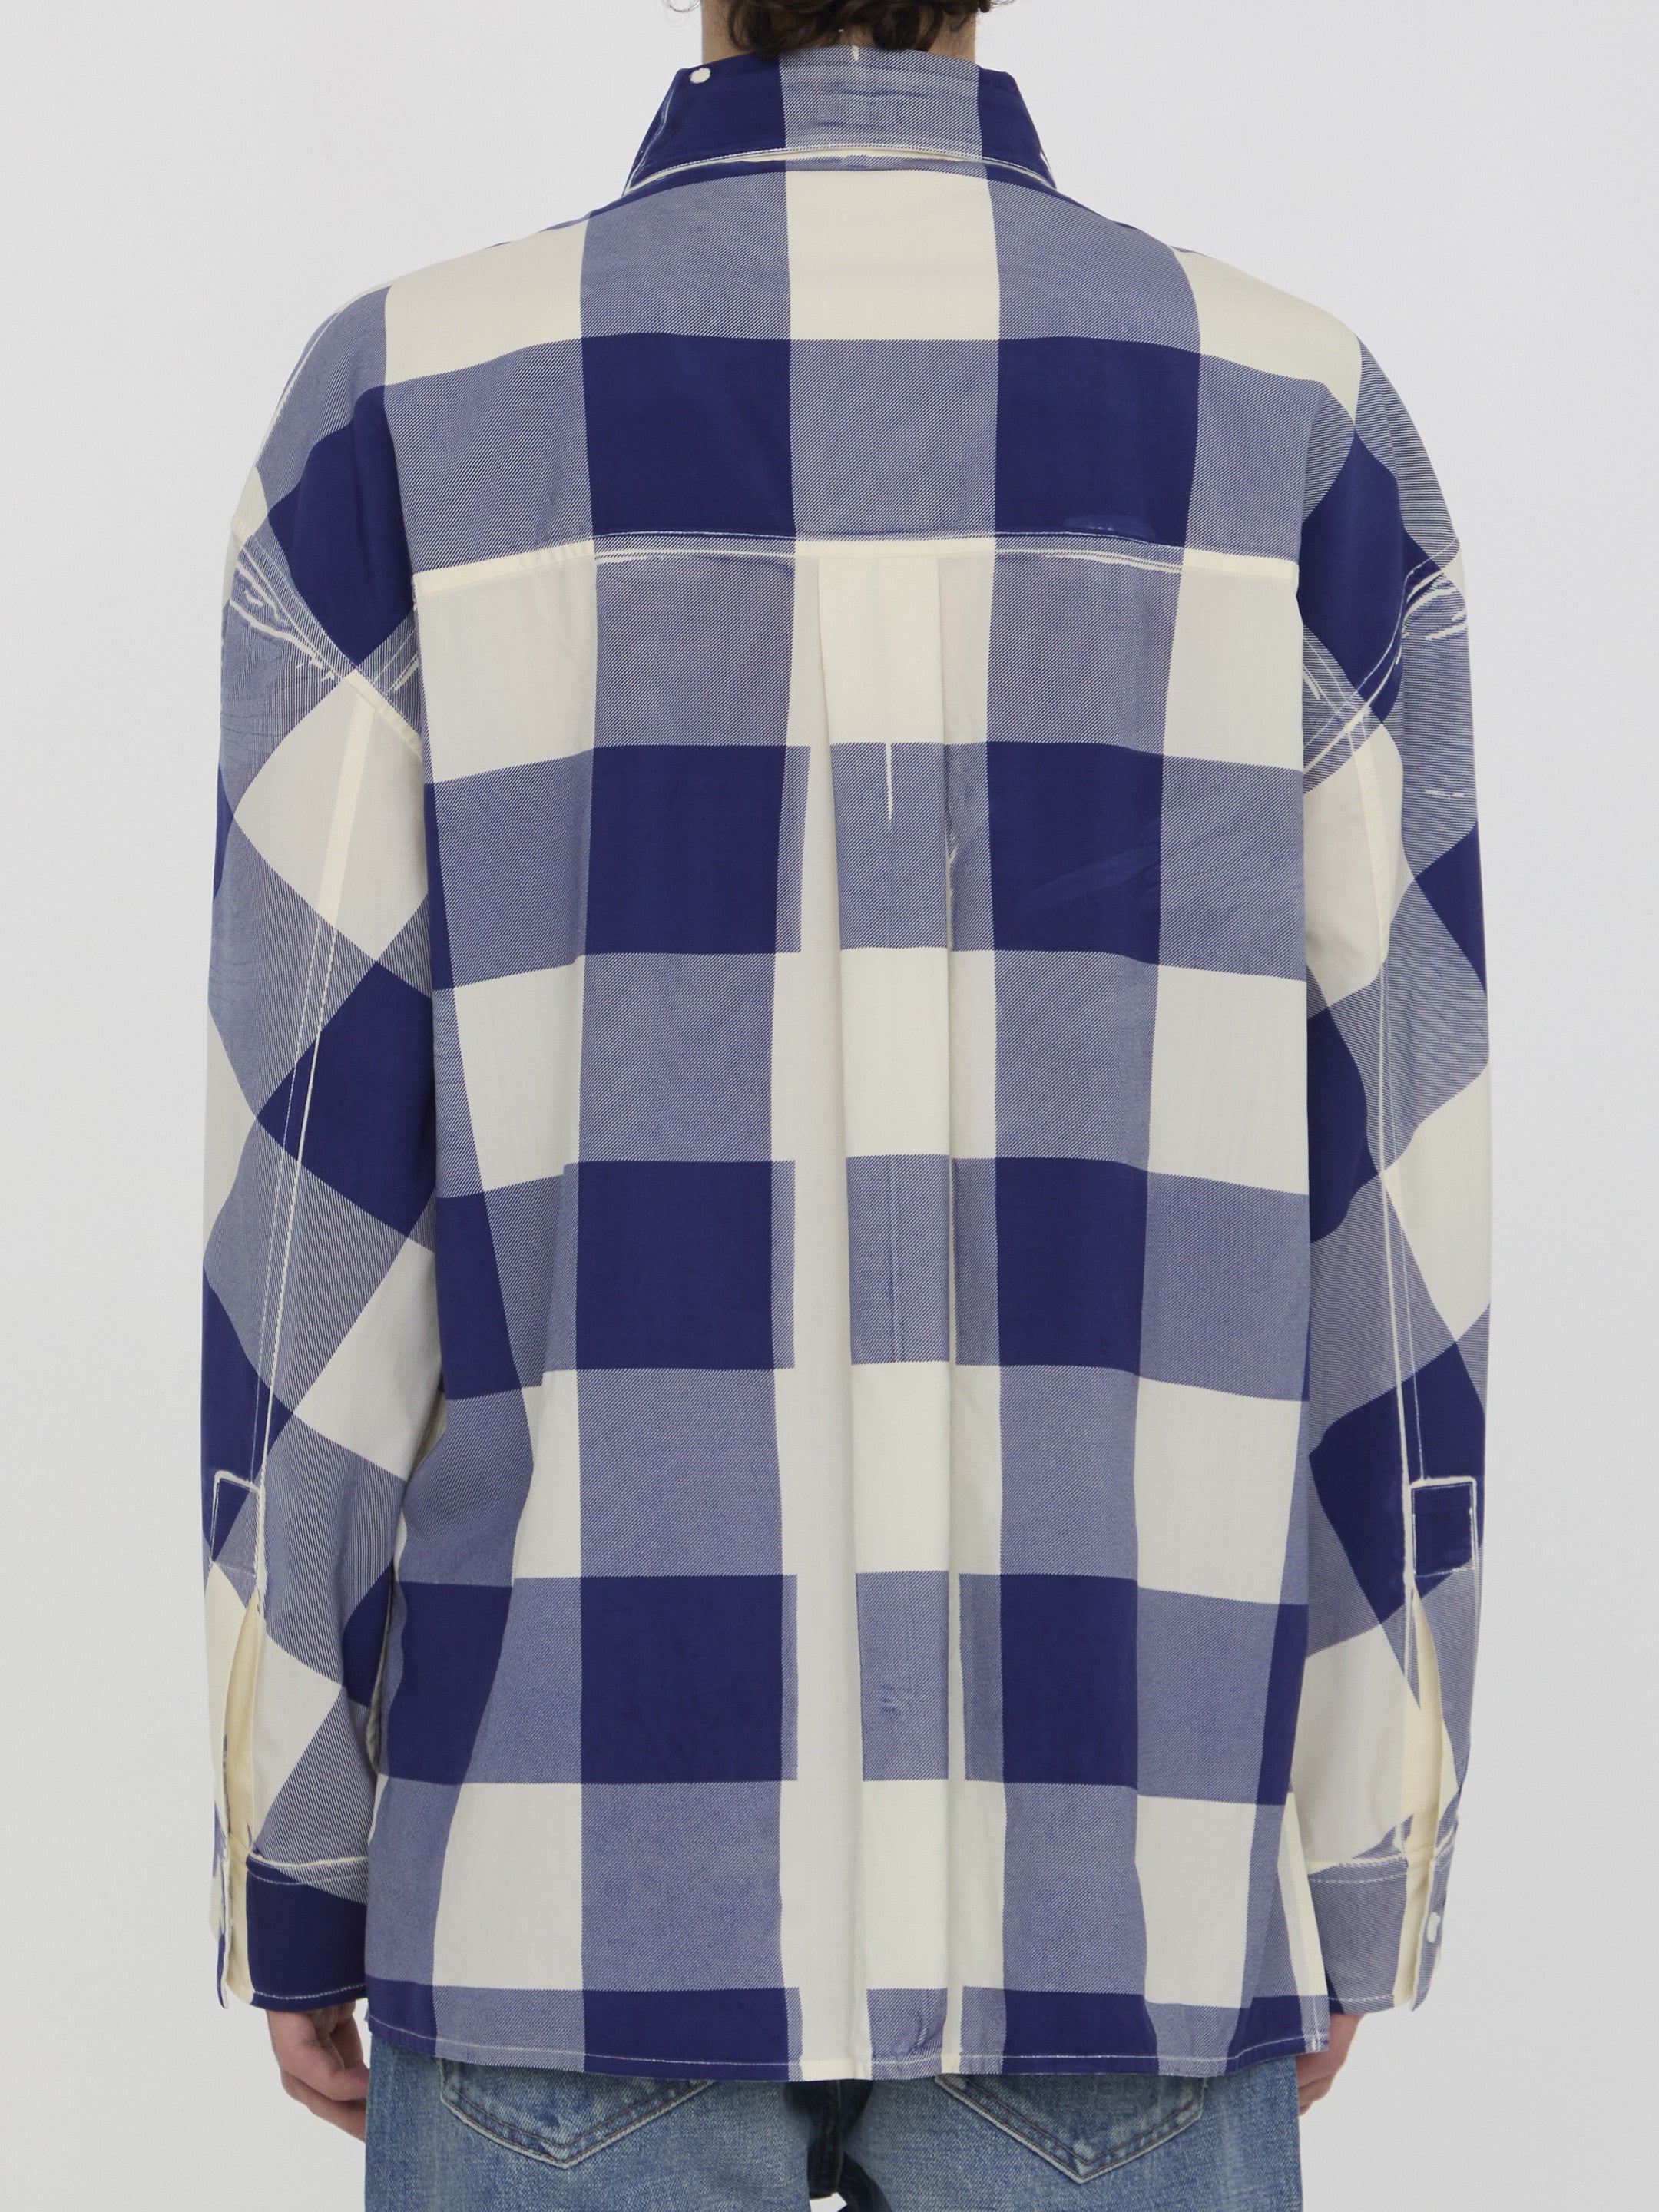 LOEWE-OUTLET-SALE-Checked-shirt-Shirts-ARCHIVE-COLLECTION-4.jpg